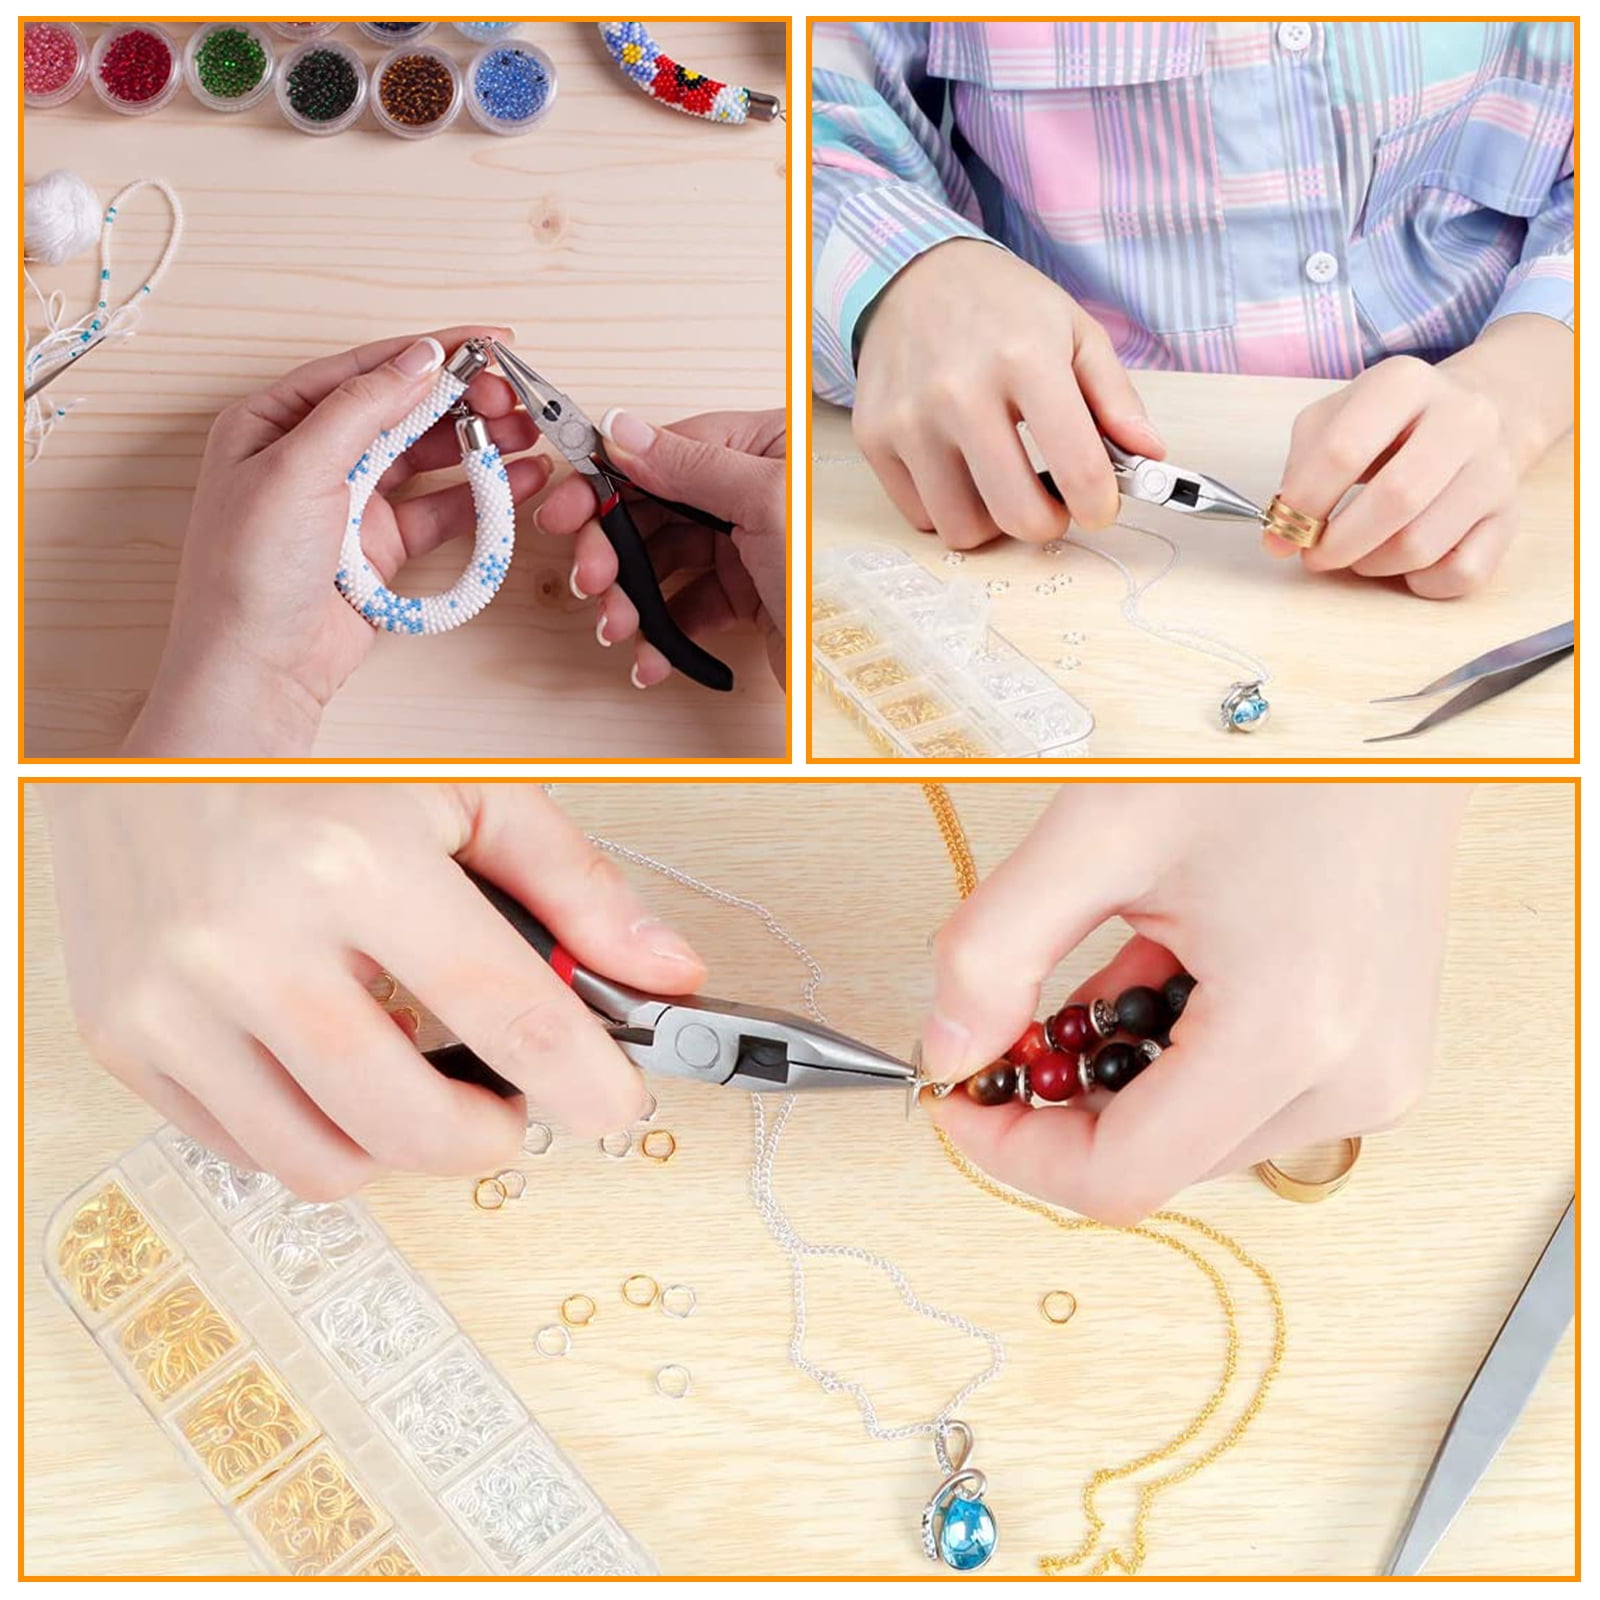 Jewelry Making Supplies Kit with Jewelry Wires and Jewelry Findings Starter Kit  Jewelry Beading Making and Repair Tools Kit - AliExpress